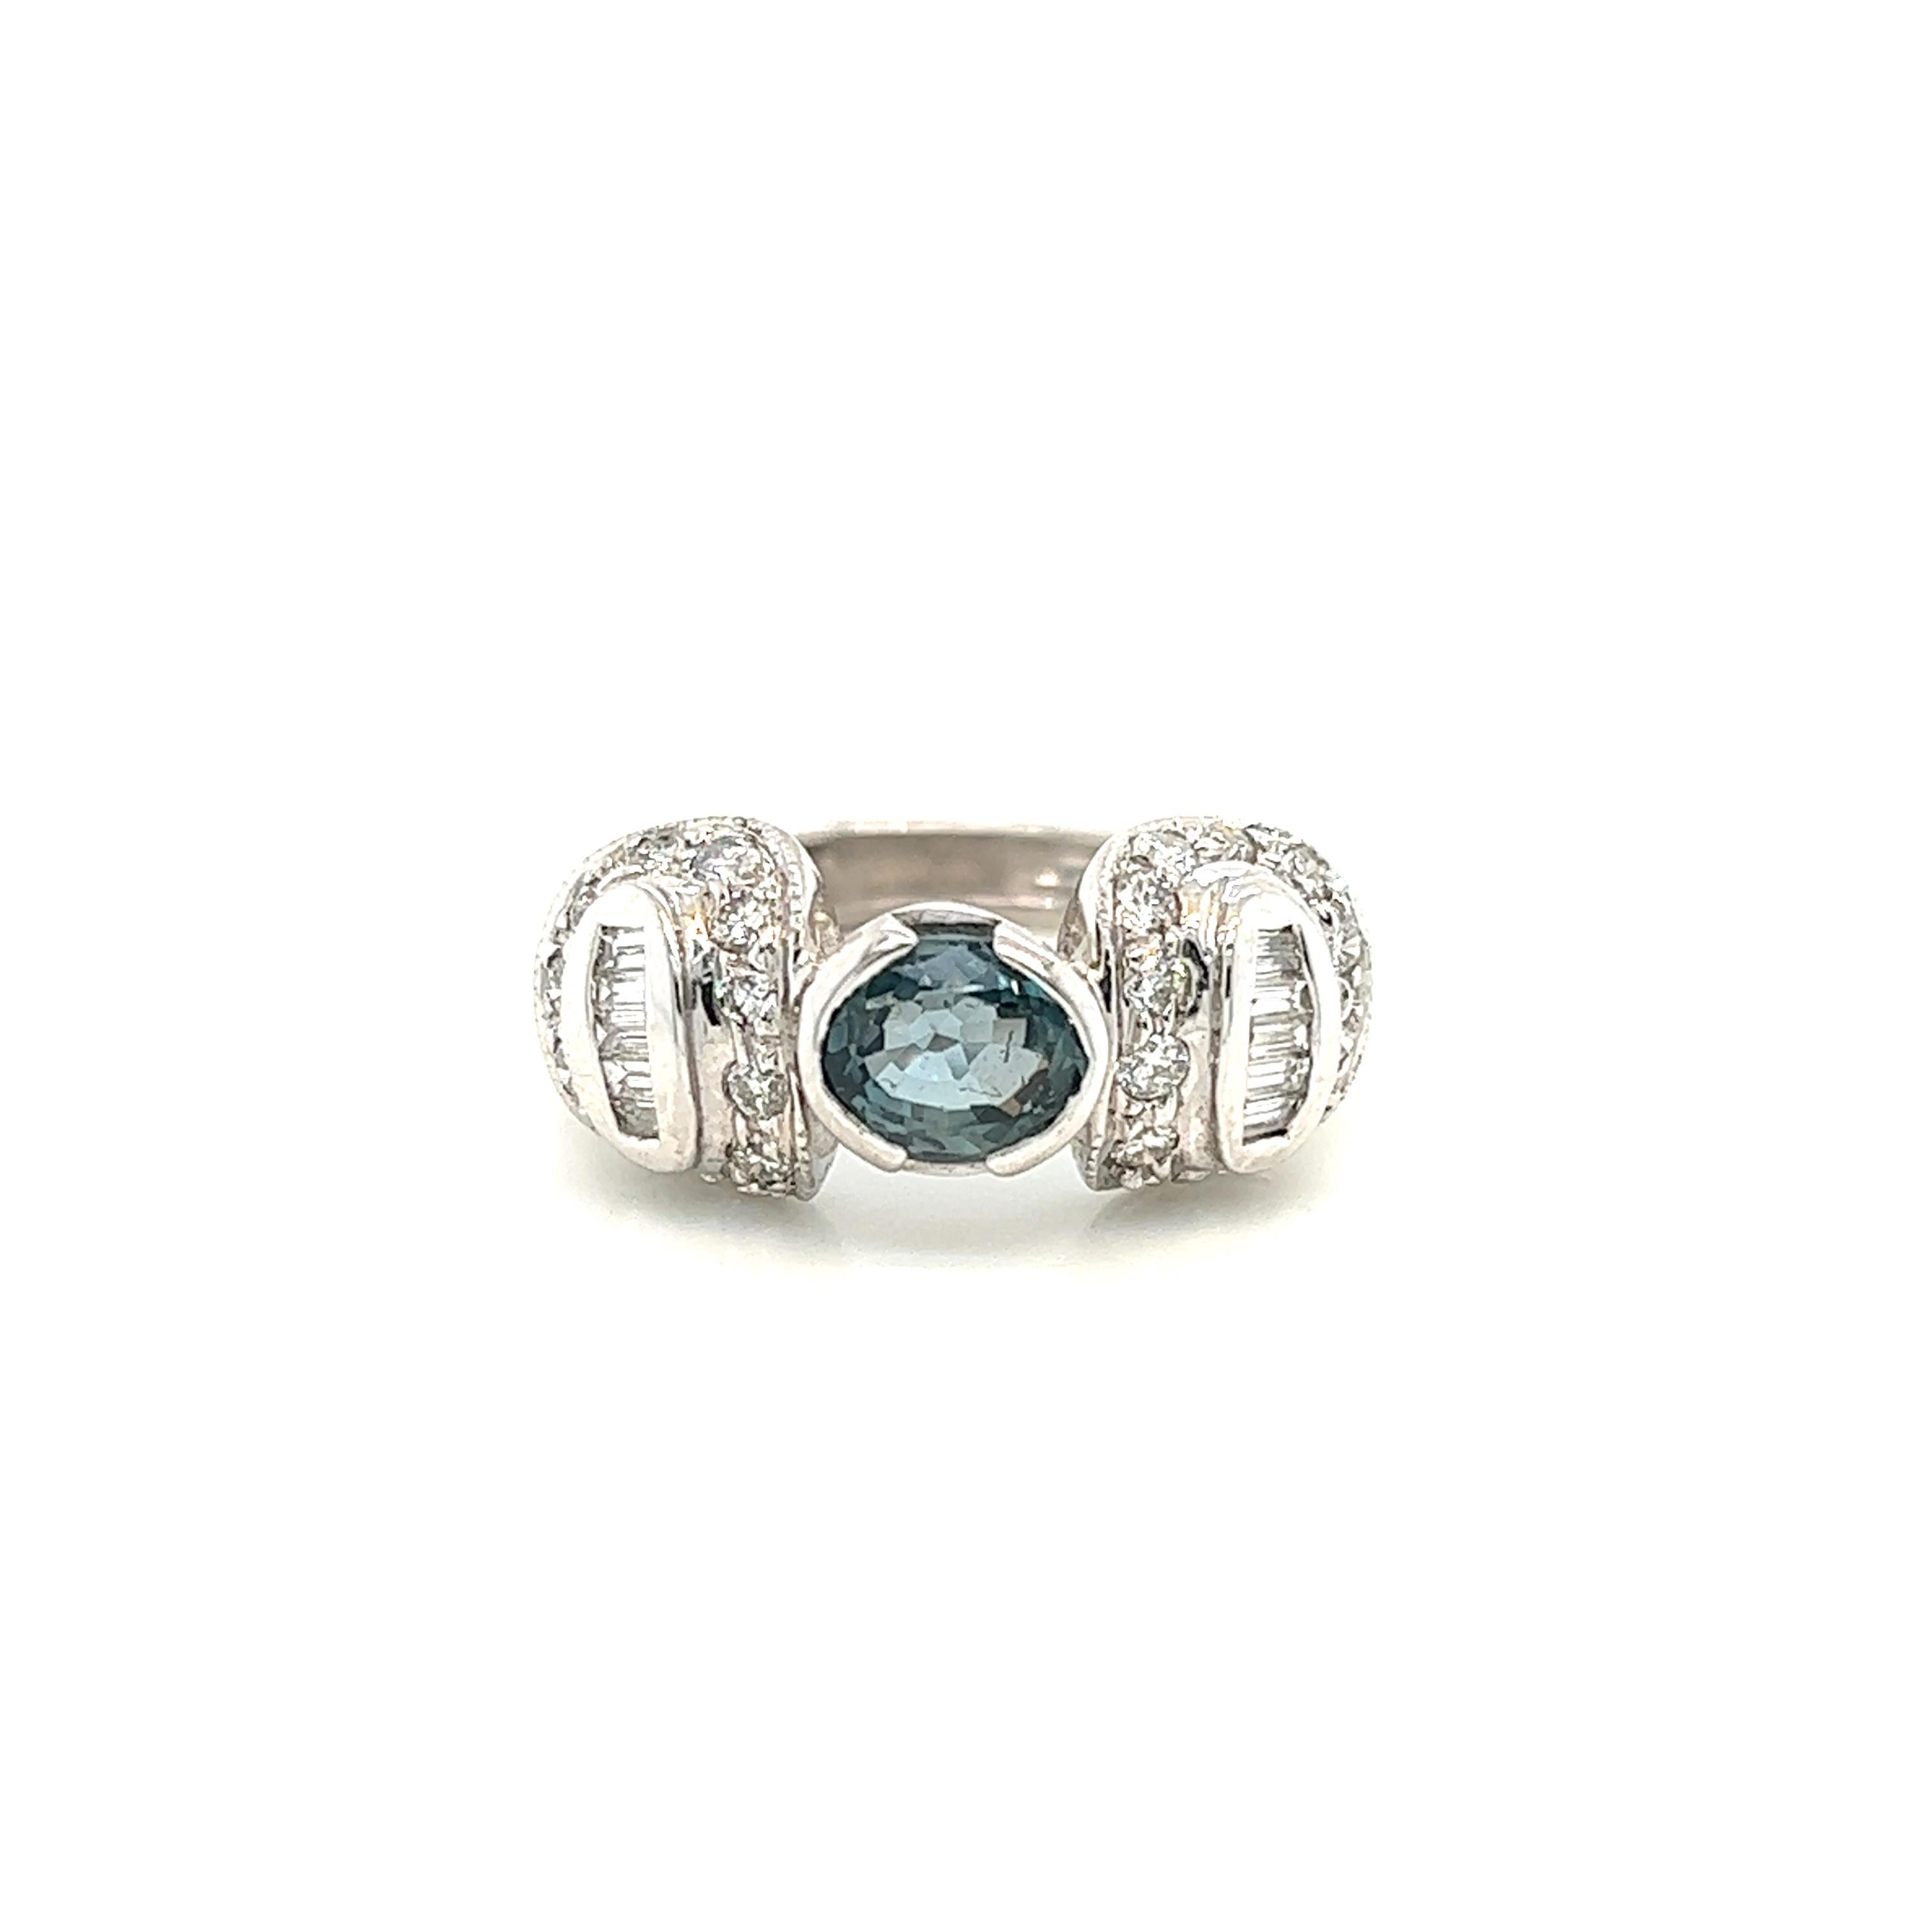 This is a gorgeous natural AAA quality Oval Alexandrite with Baguette diamonds that is set in solid 18K white gold. This ring features a natural 1.38 carat oval alexandrite that is certified by the Gemological Institute of America (GIA). The ring is